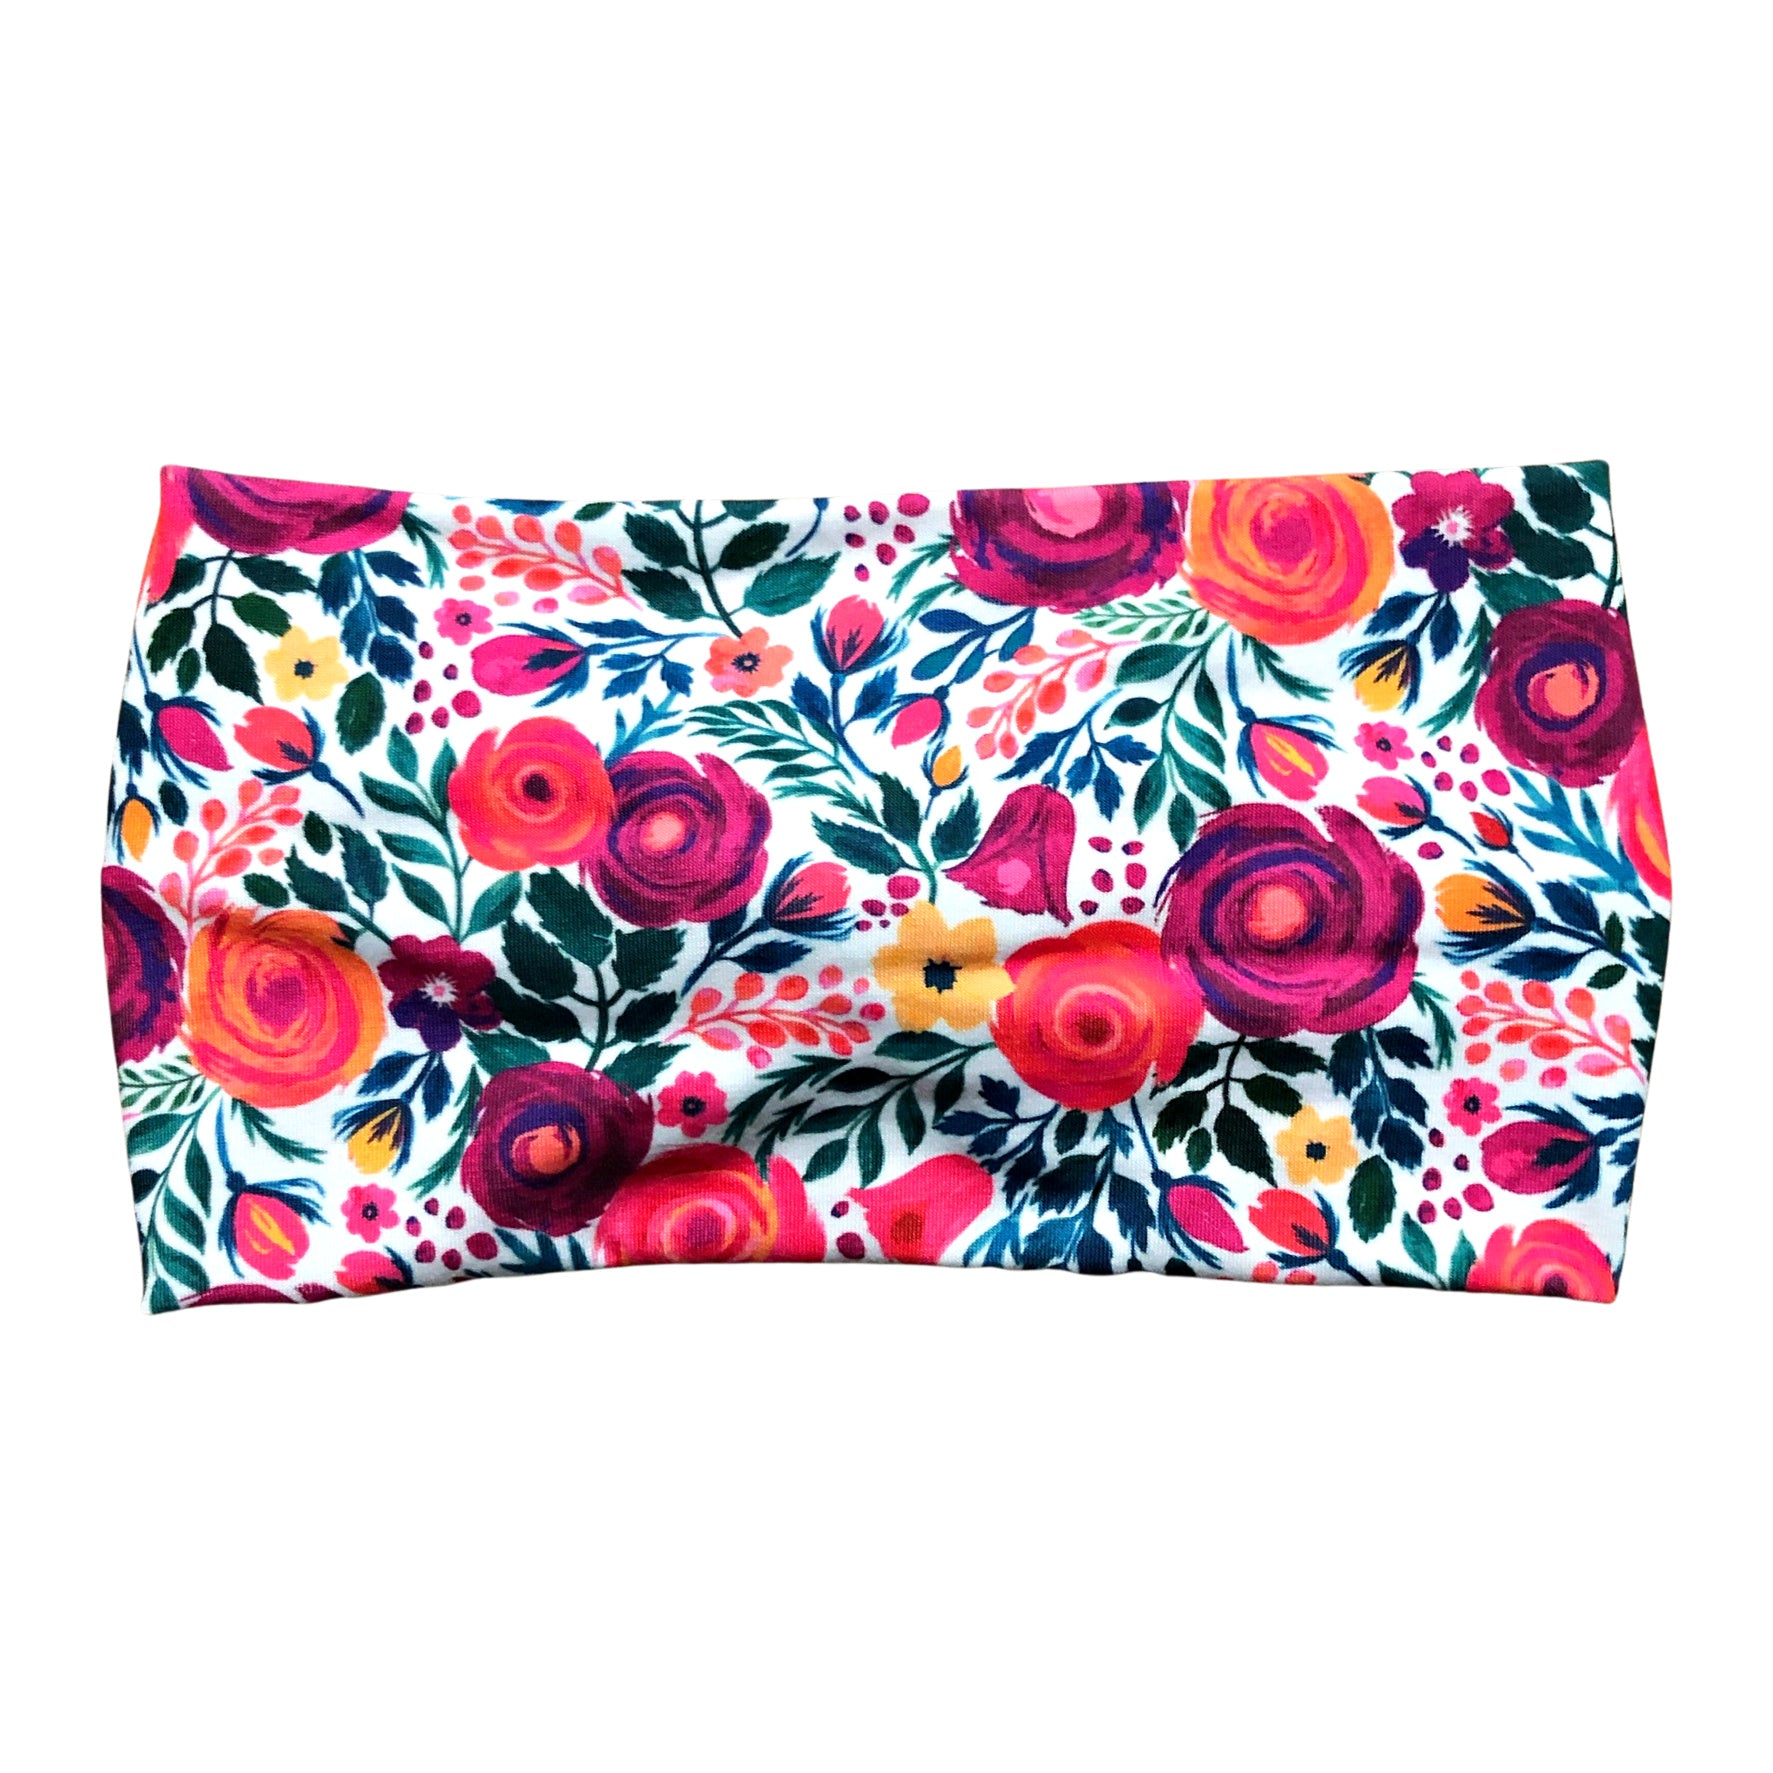 Neon Floral Wide Headband for Women